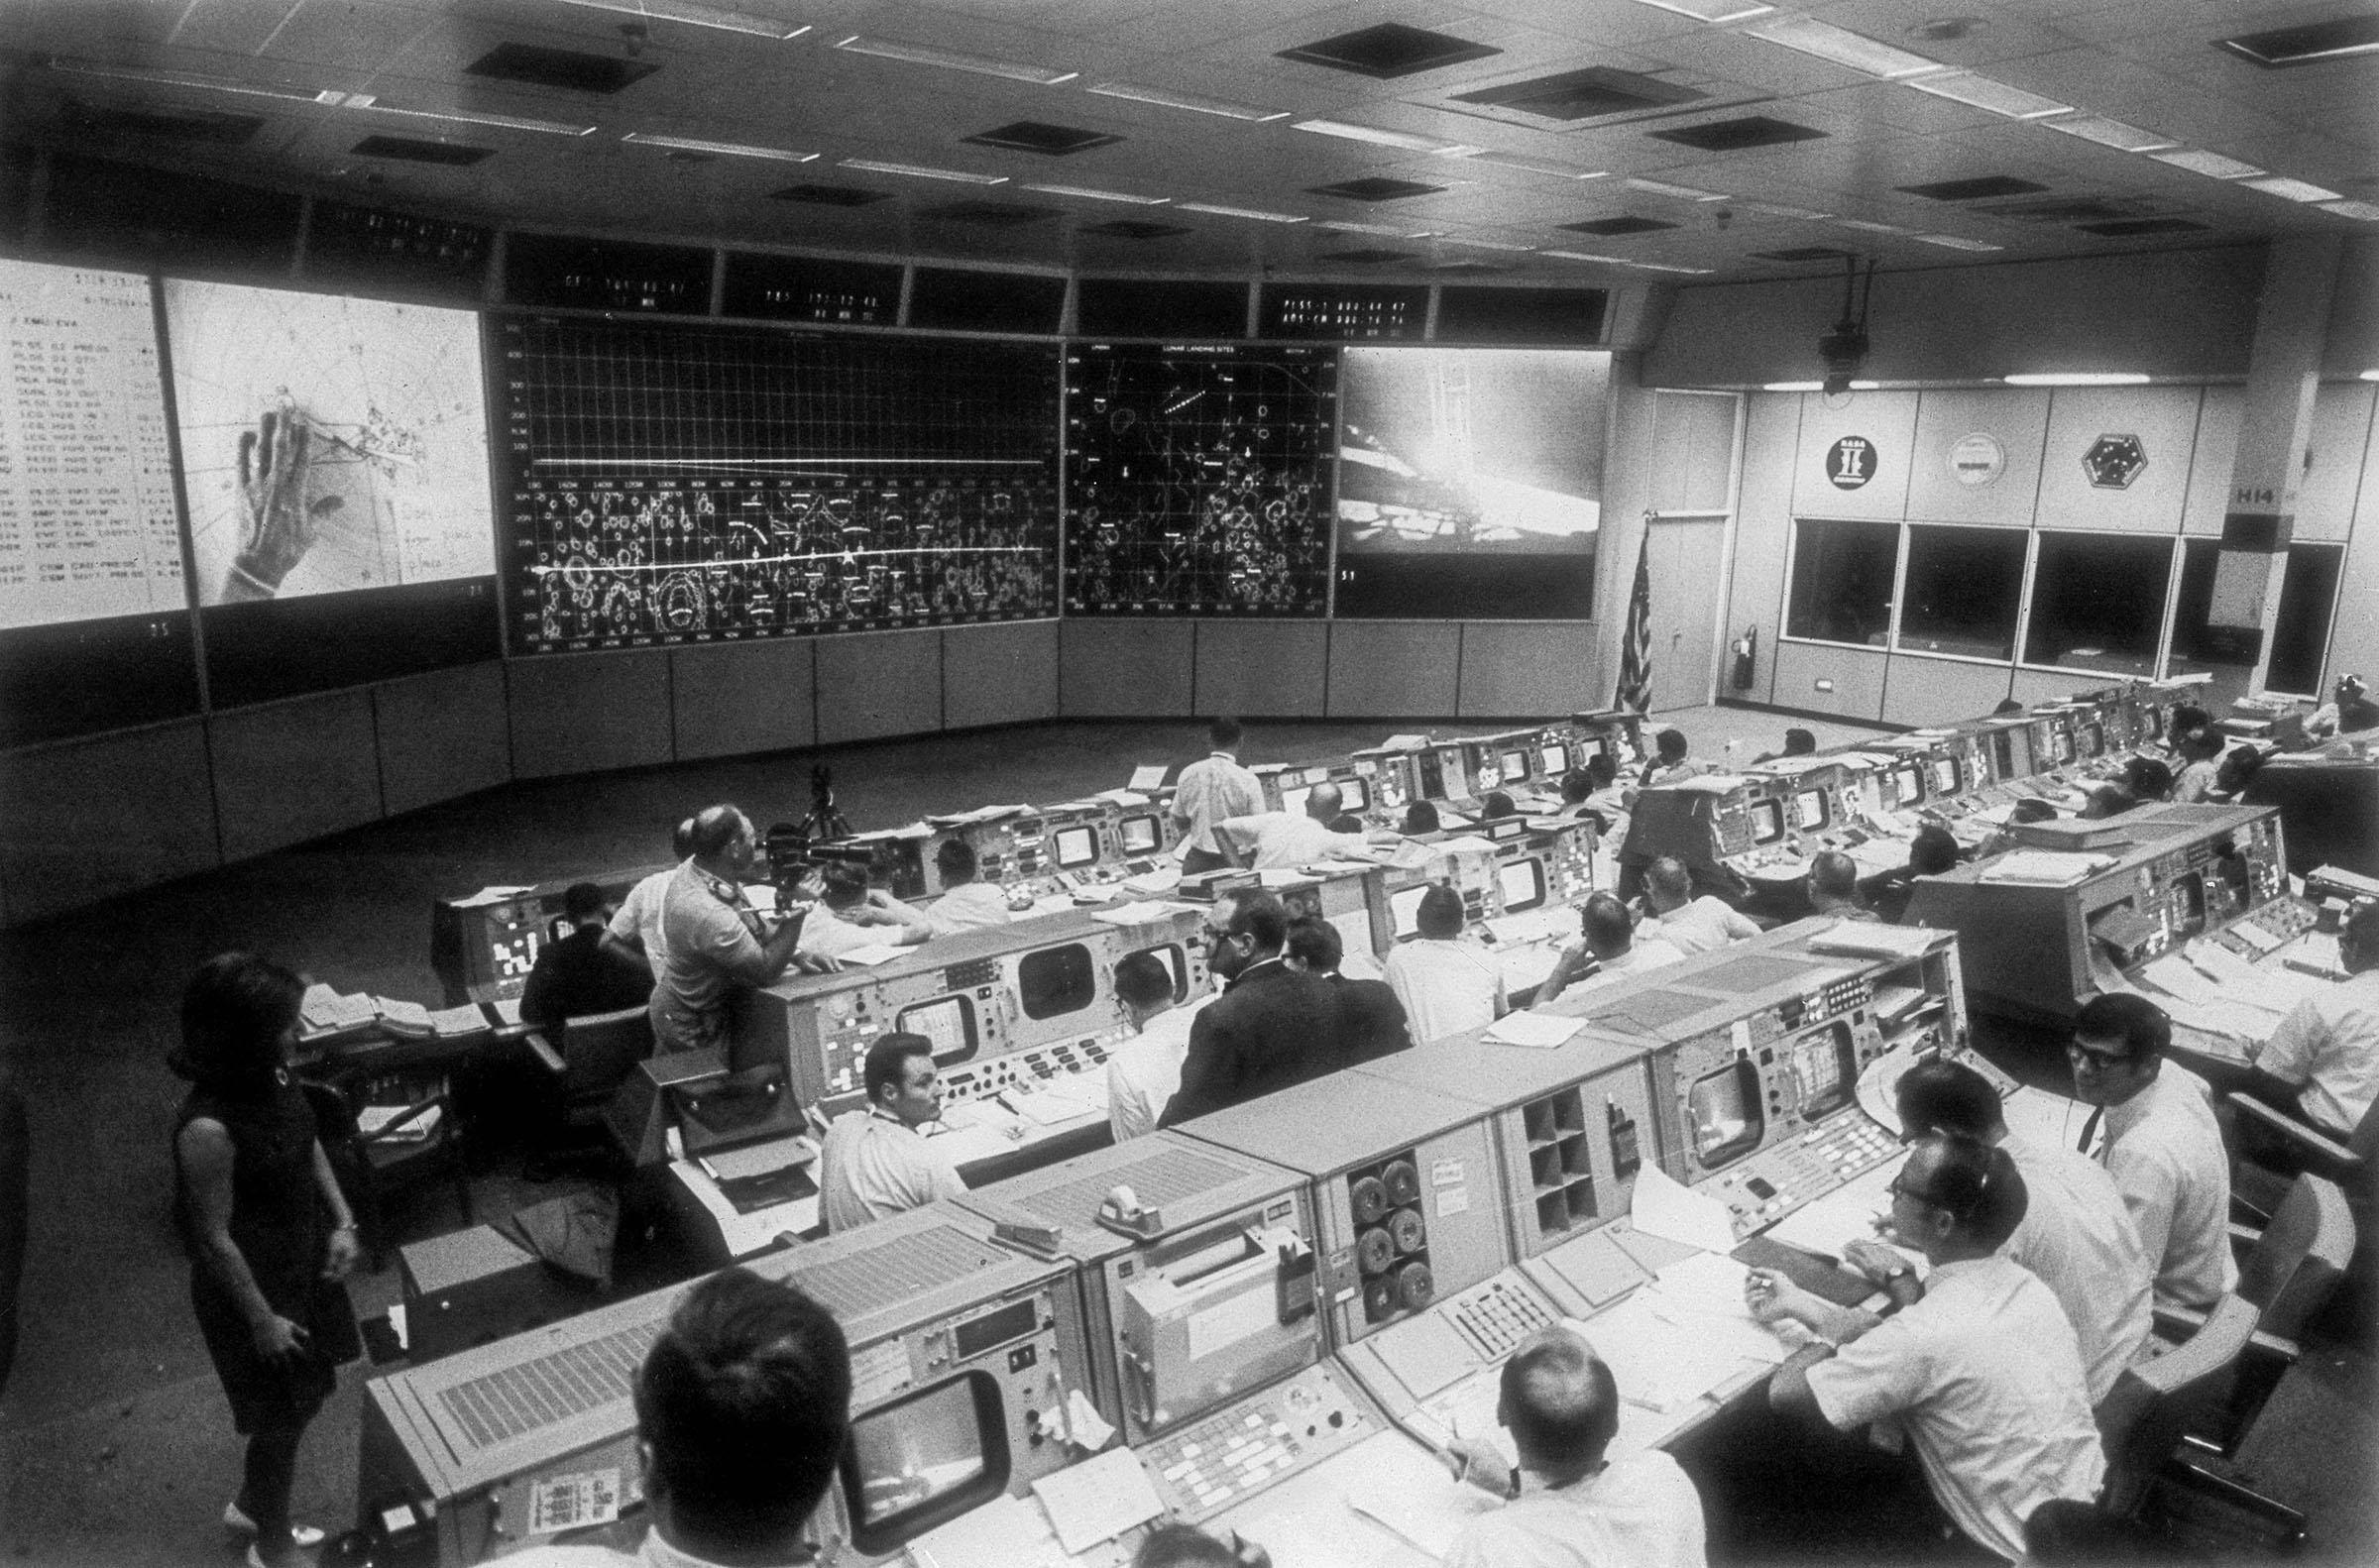 A historical black and white photgraph of people working in a large control rooom with several computer monitors and screens